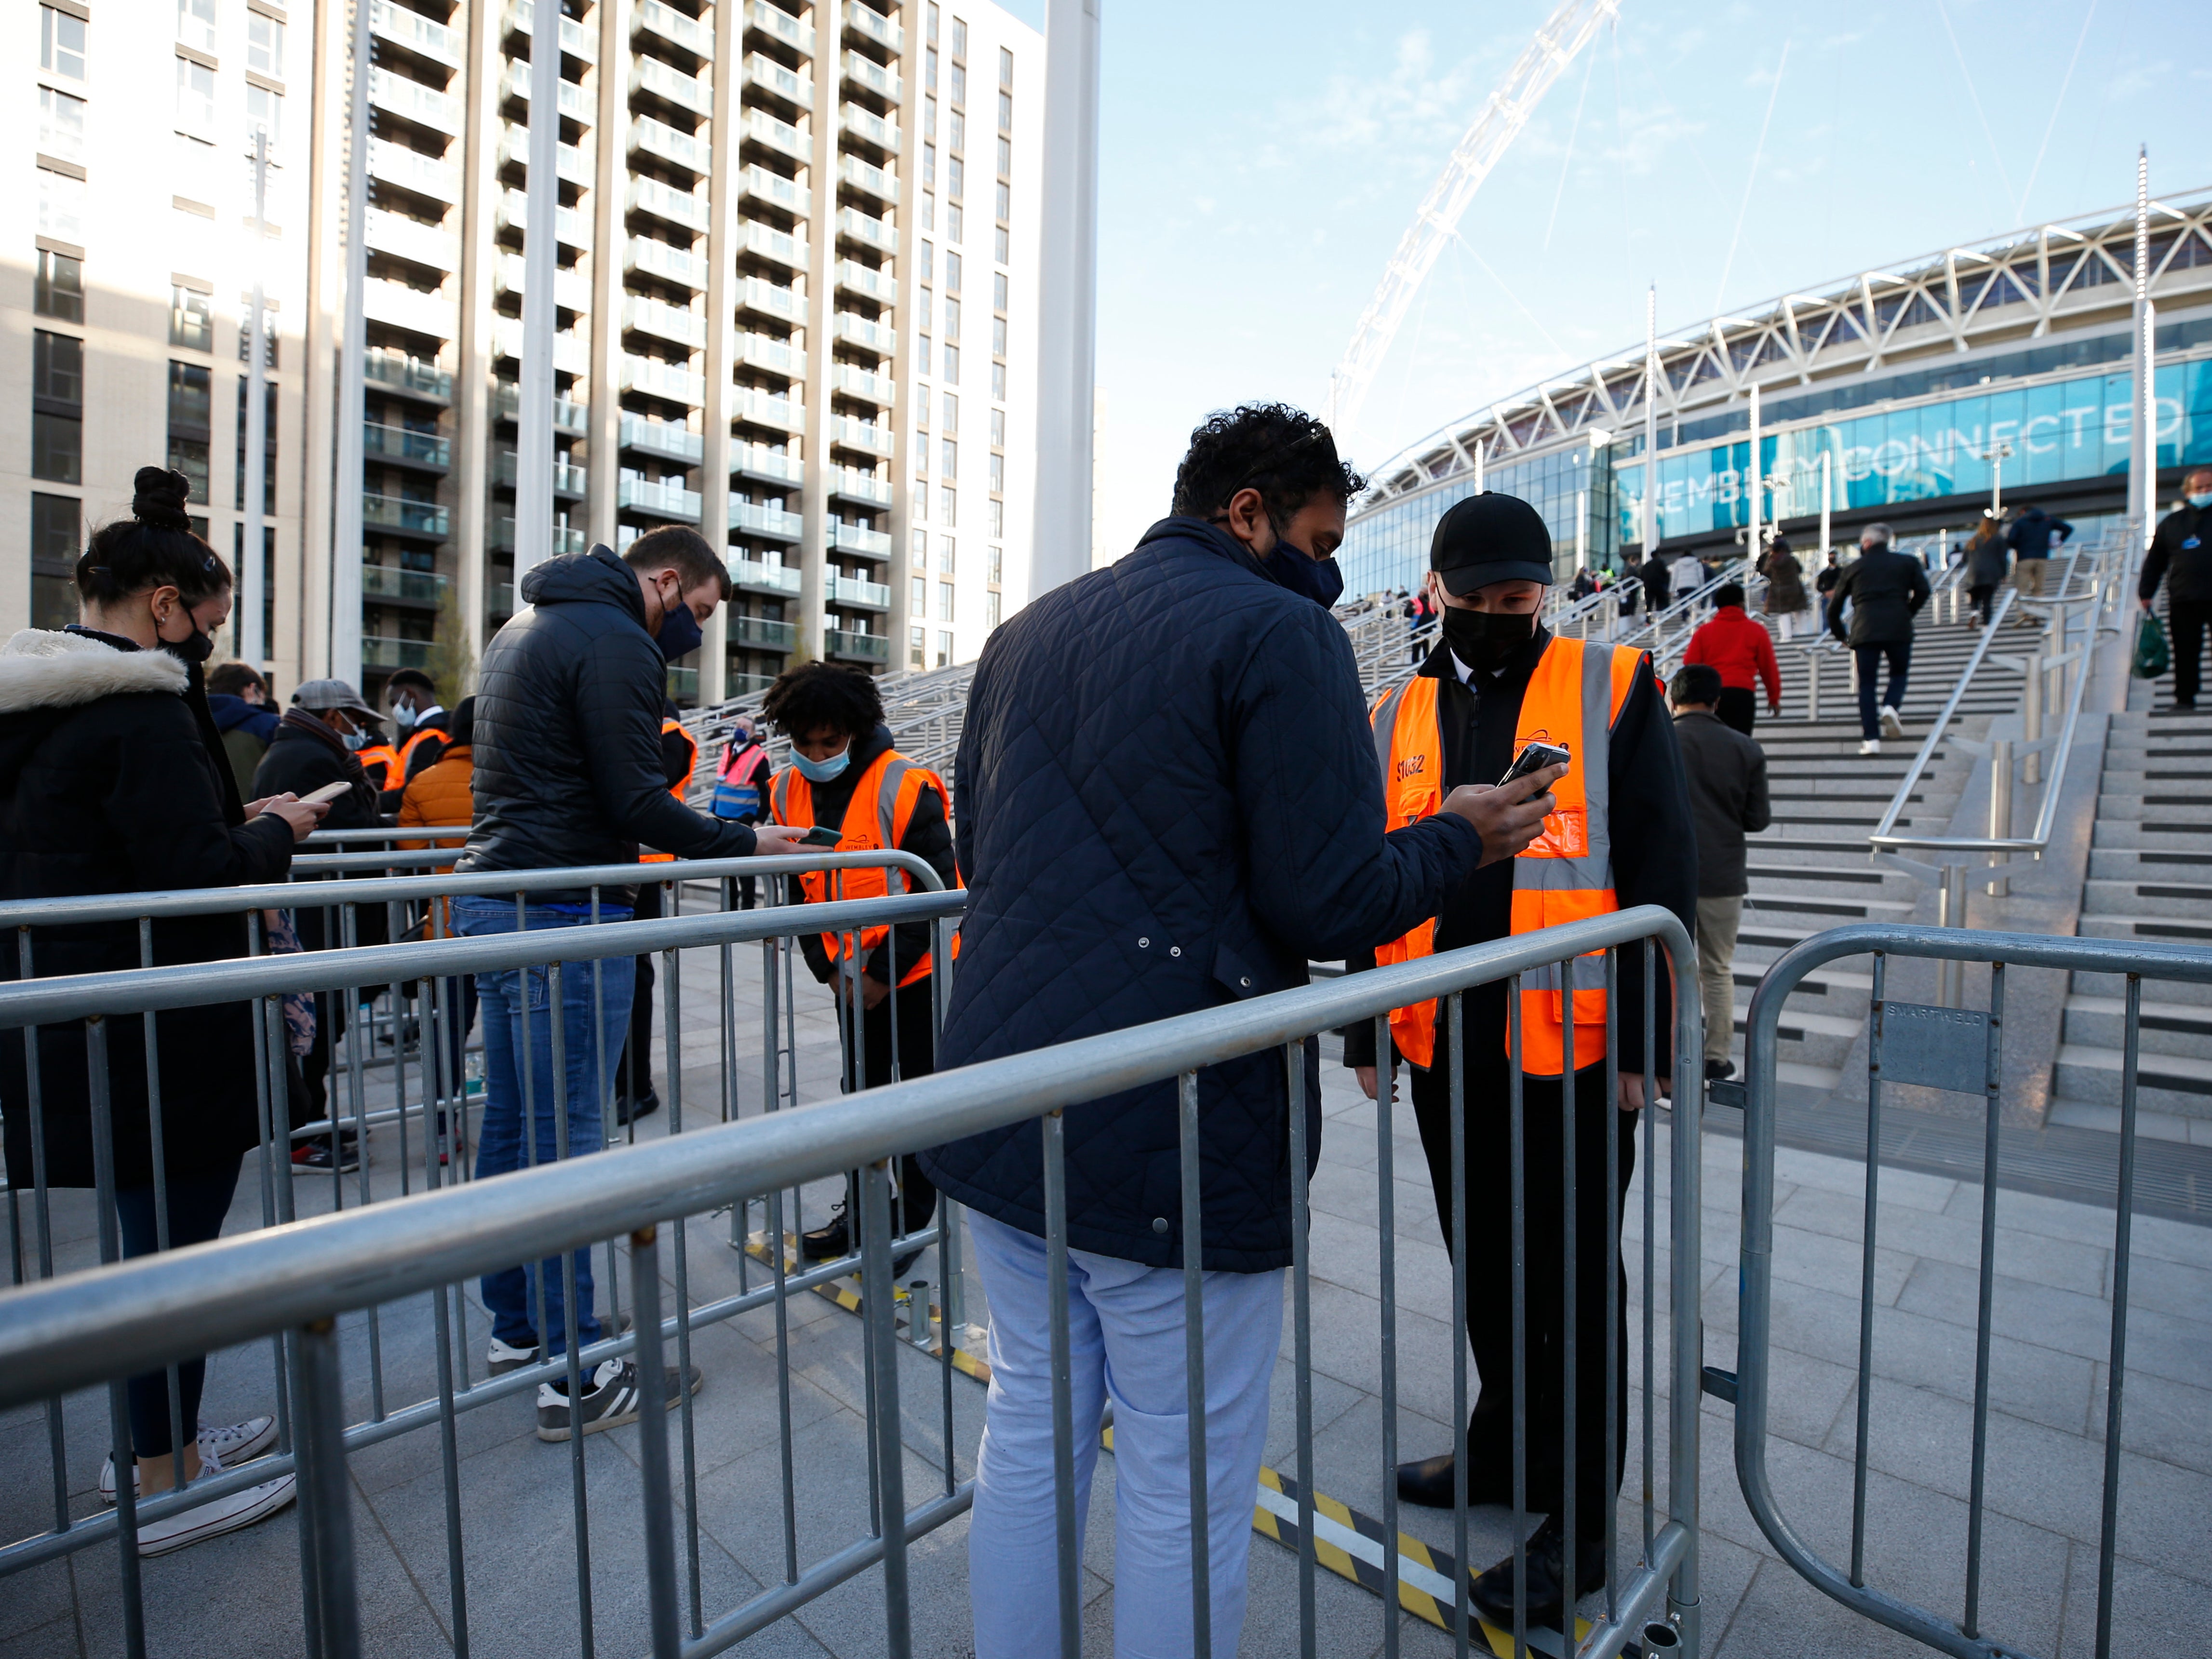 Football fans show their negative Covid-19 test results in order to enter Wembley Stadium for the FA Cup final